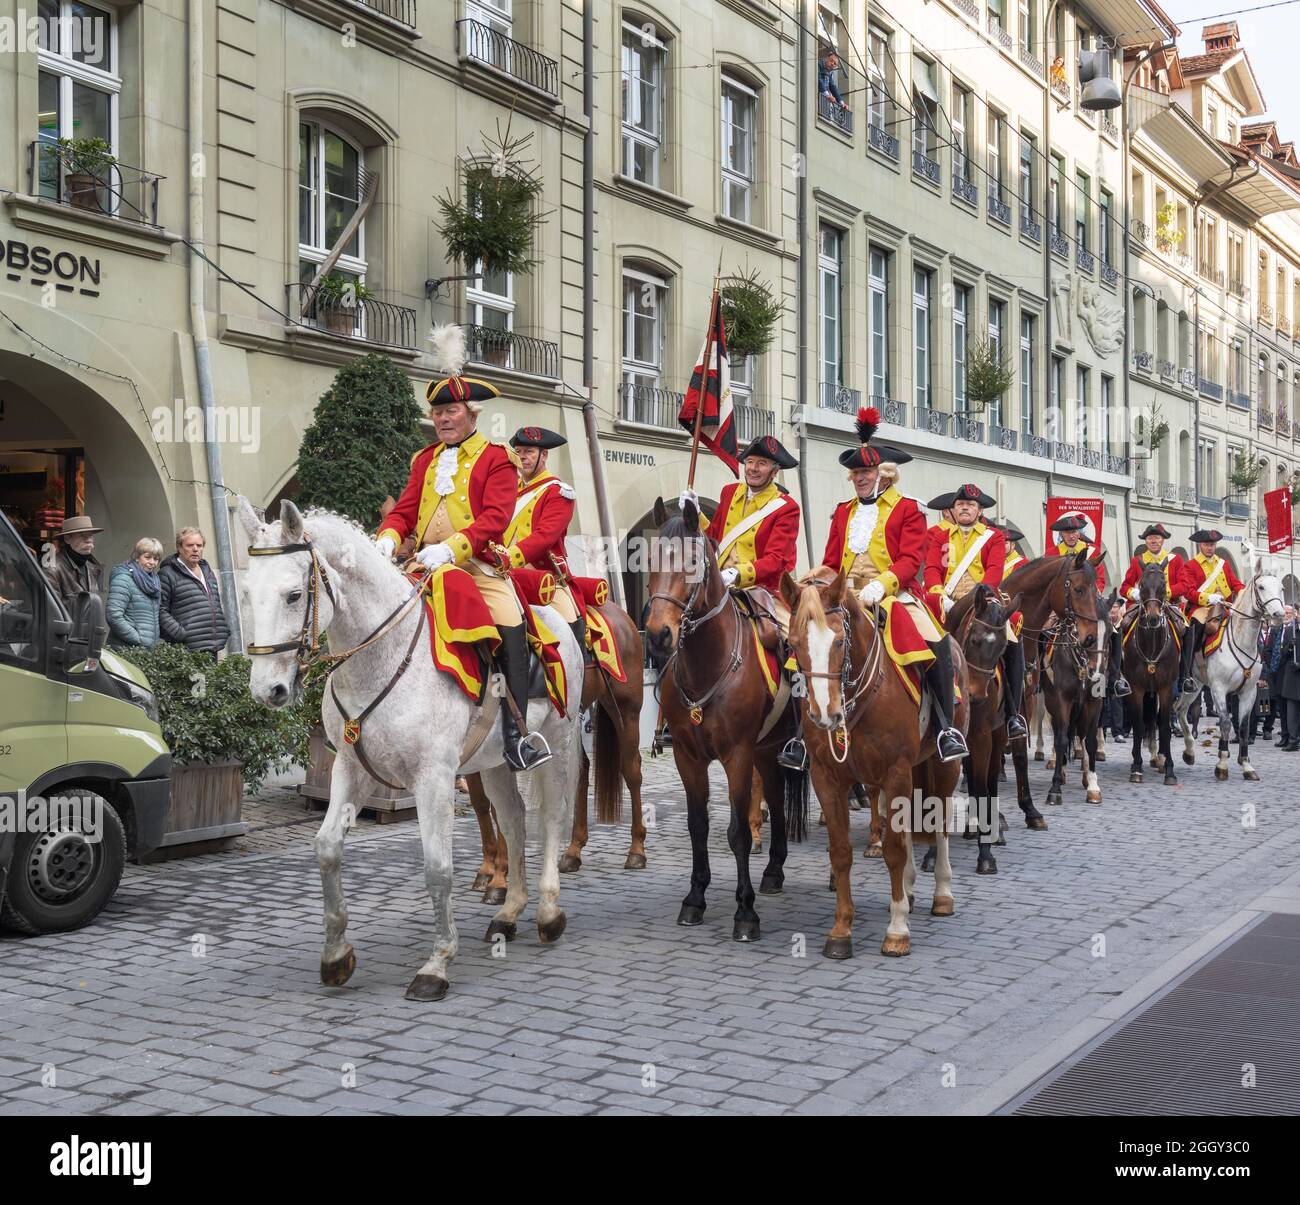 Parade of swiss soldiers on traditional costume during Zibelemarit Holiday (Onion Market) - Bern, Switzerland Stock Photo